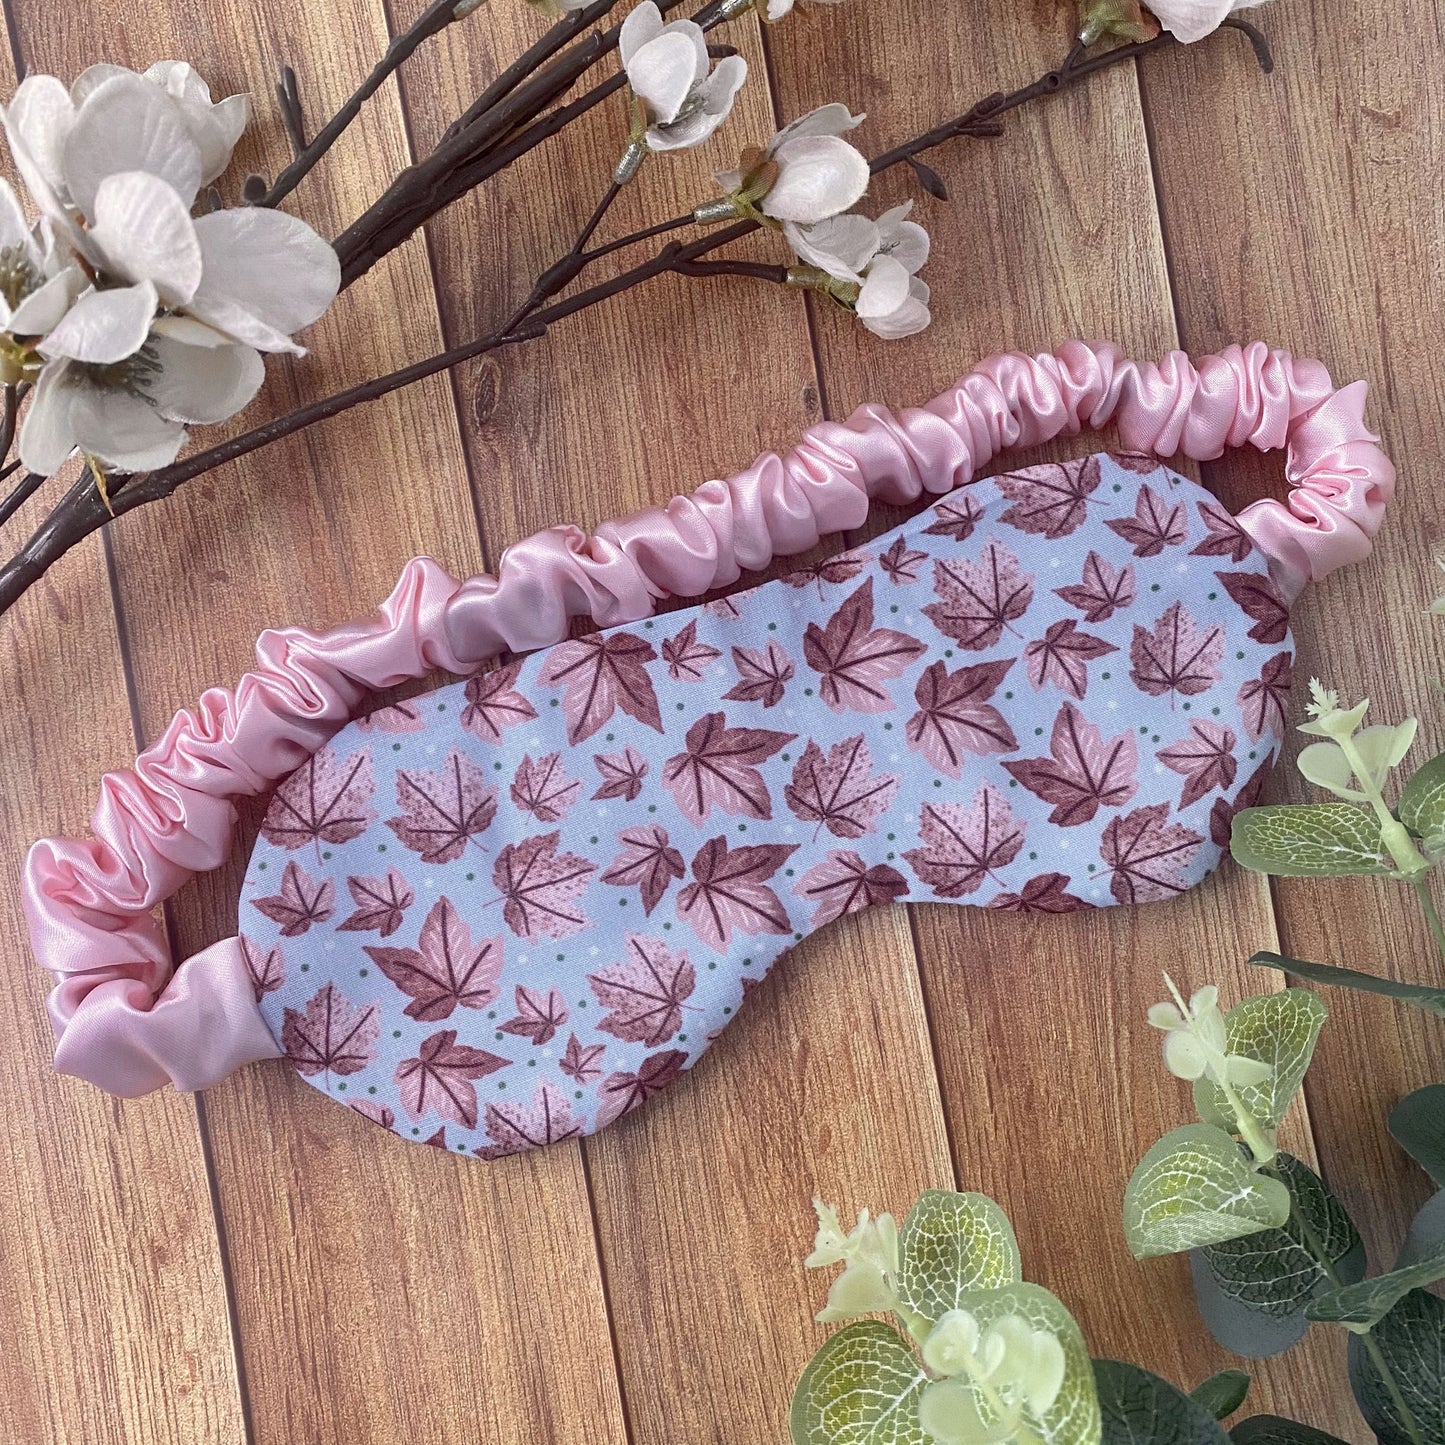 pink leafy patterned sleepmask on wooden background and foliage around it